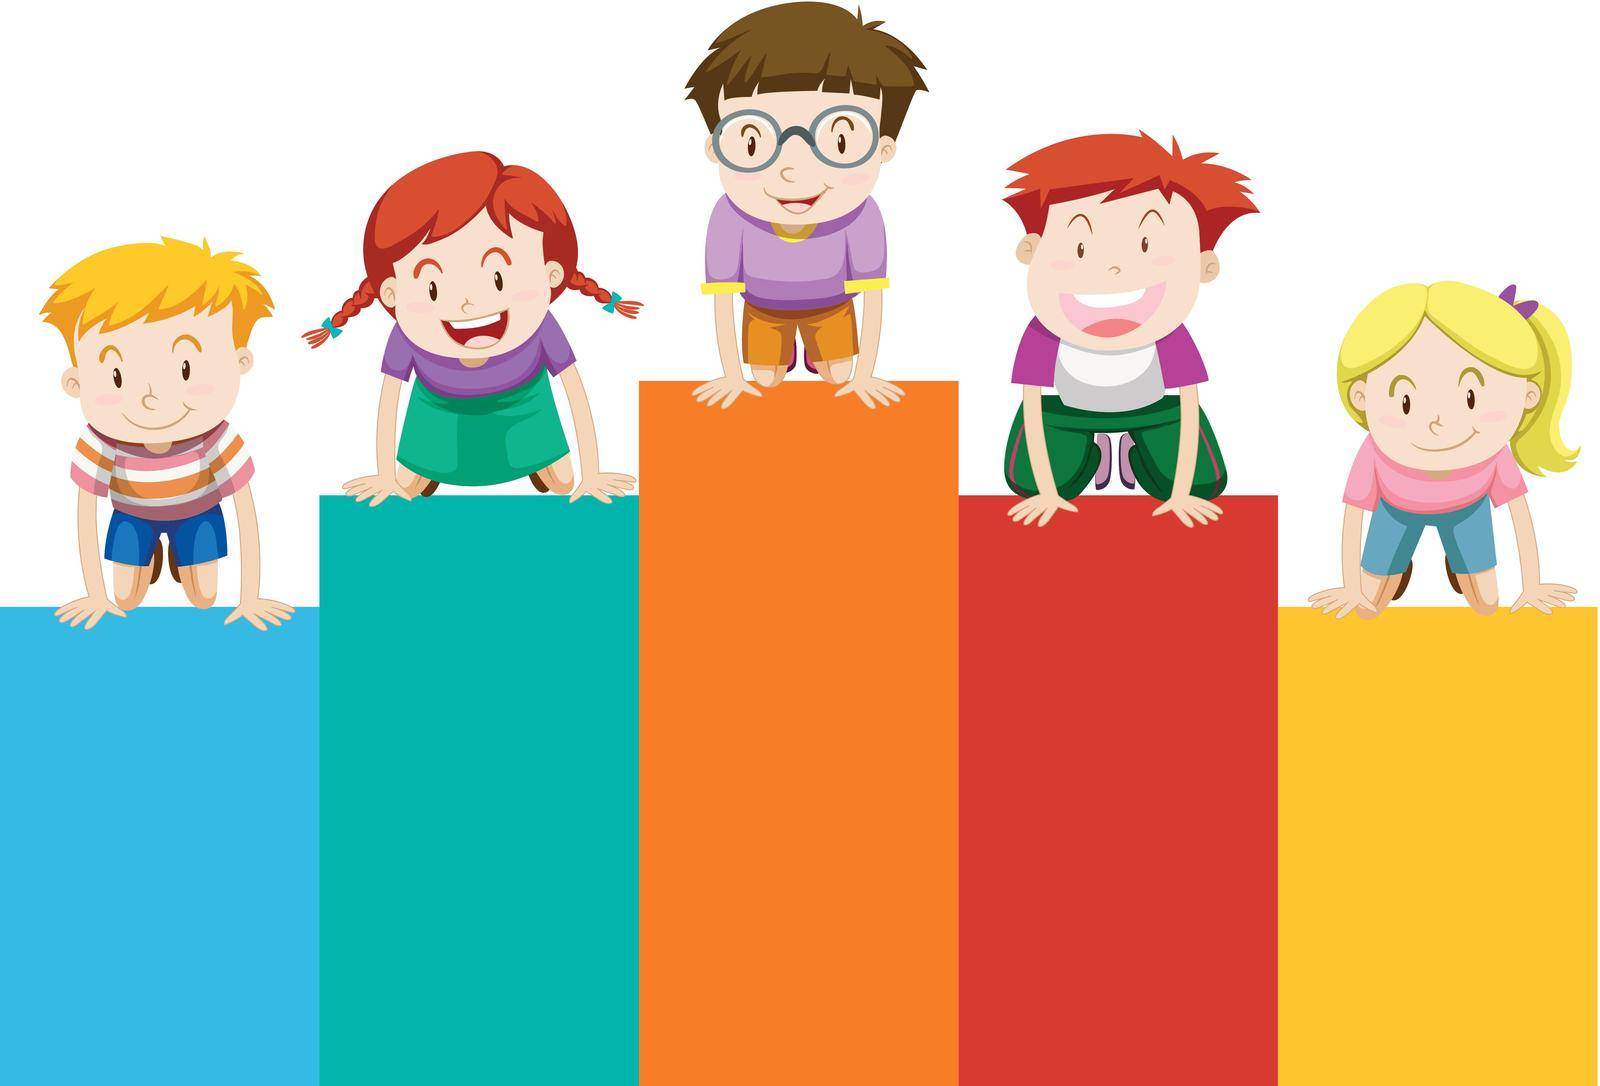 Children on bar chart by iimages